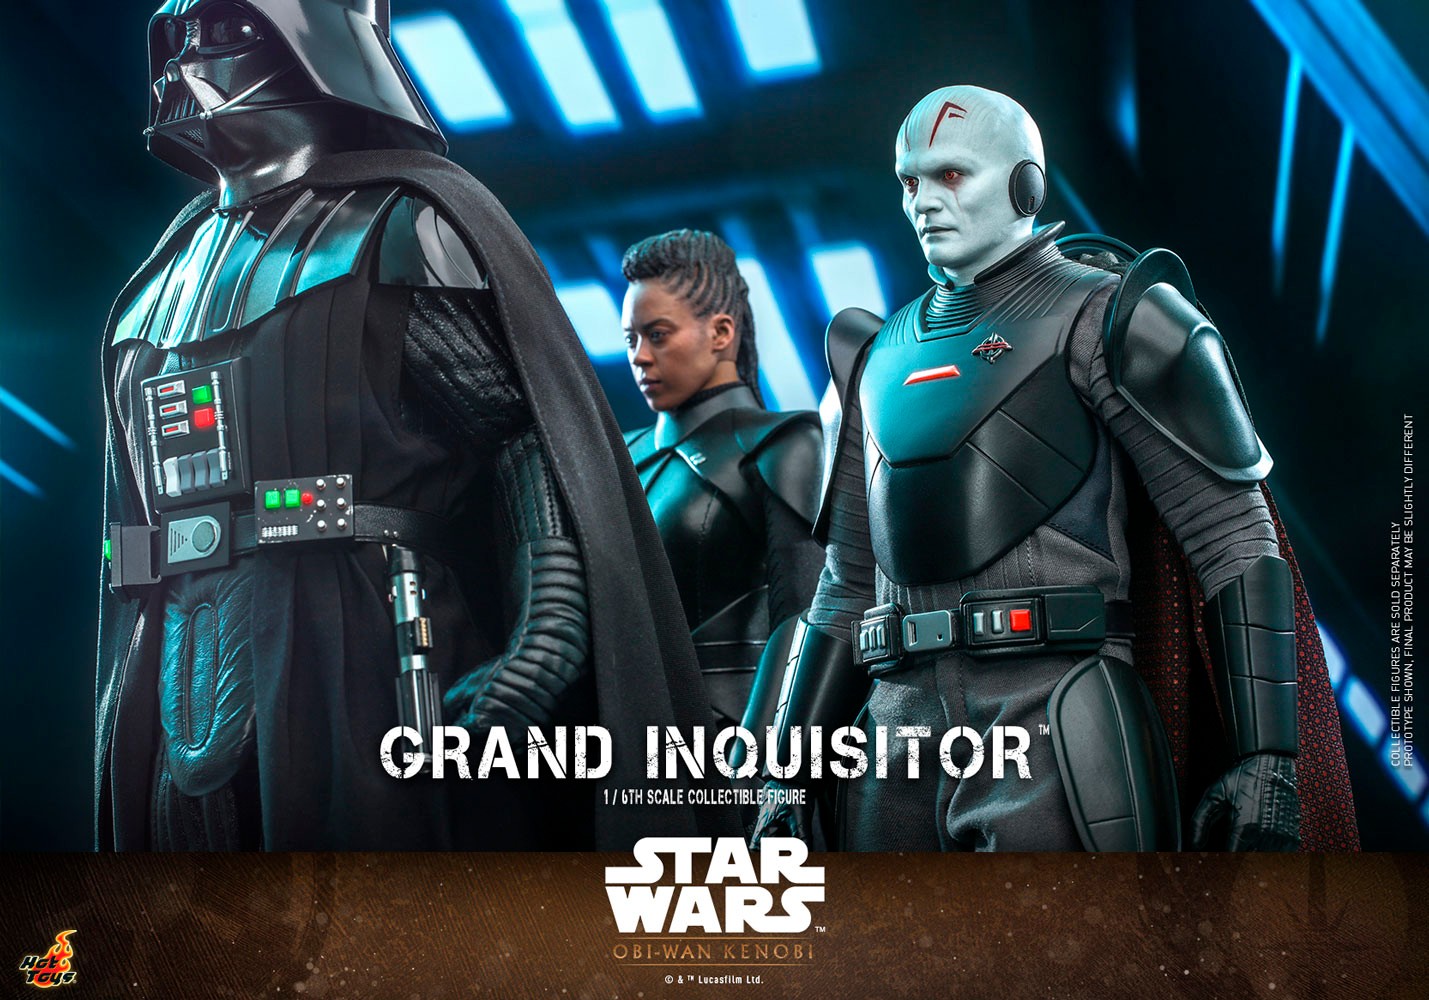 Grand Inquisitor (Prototype Shown) View 3